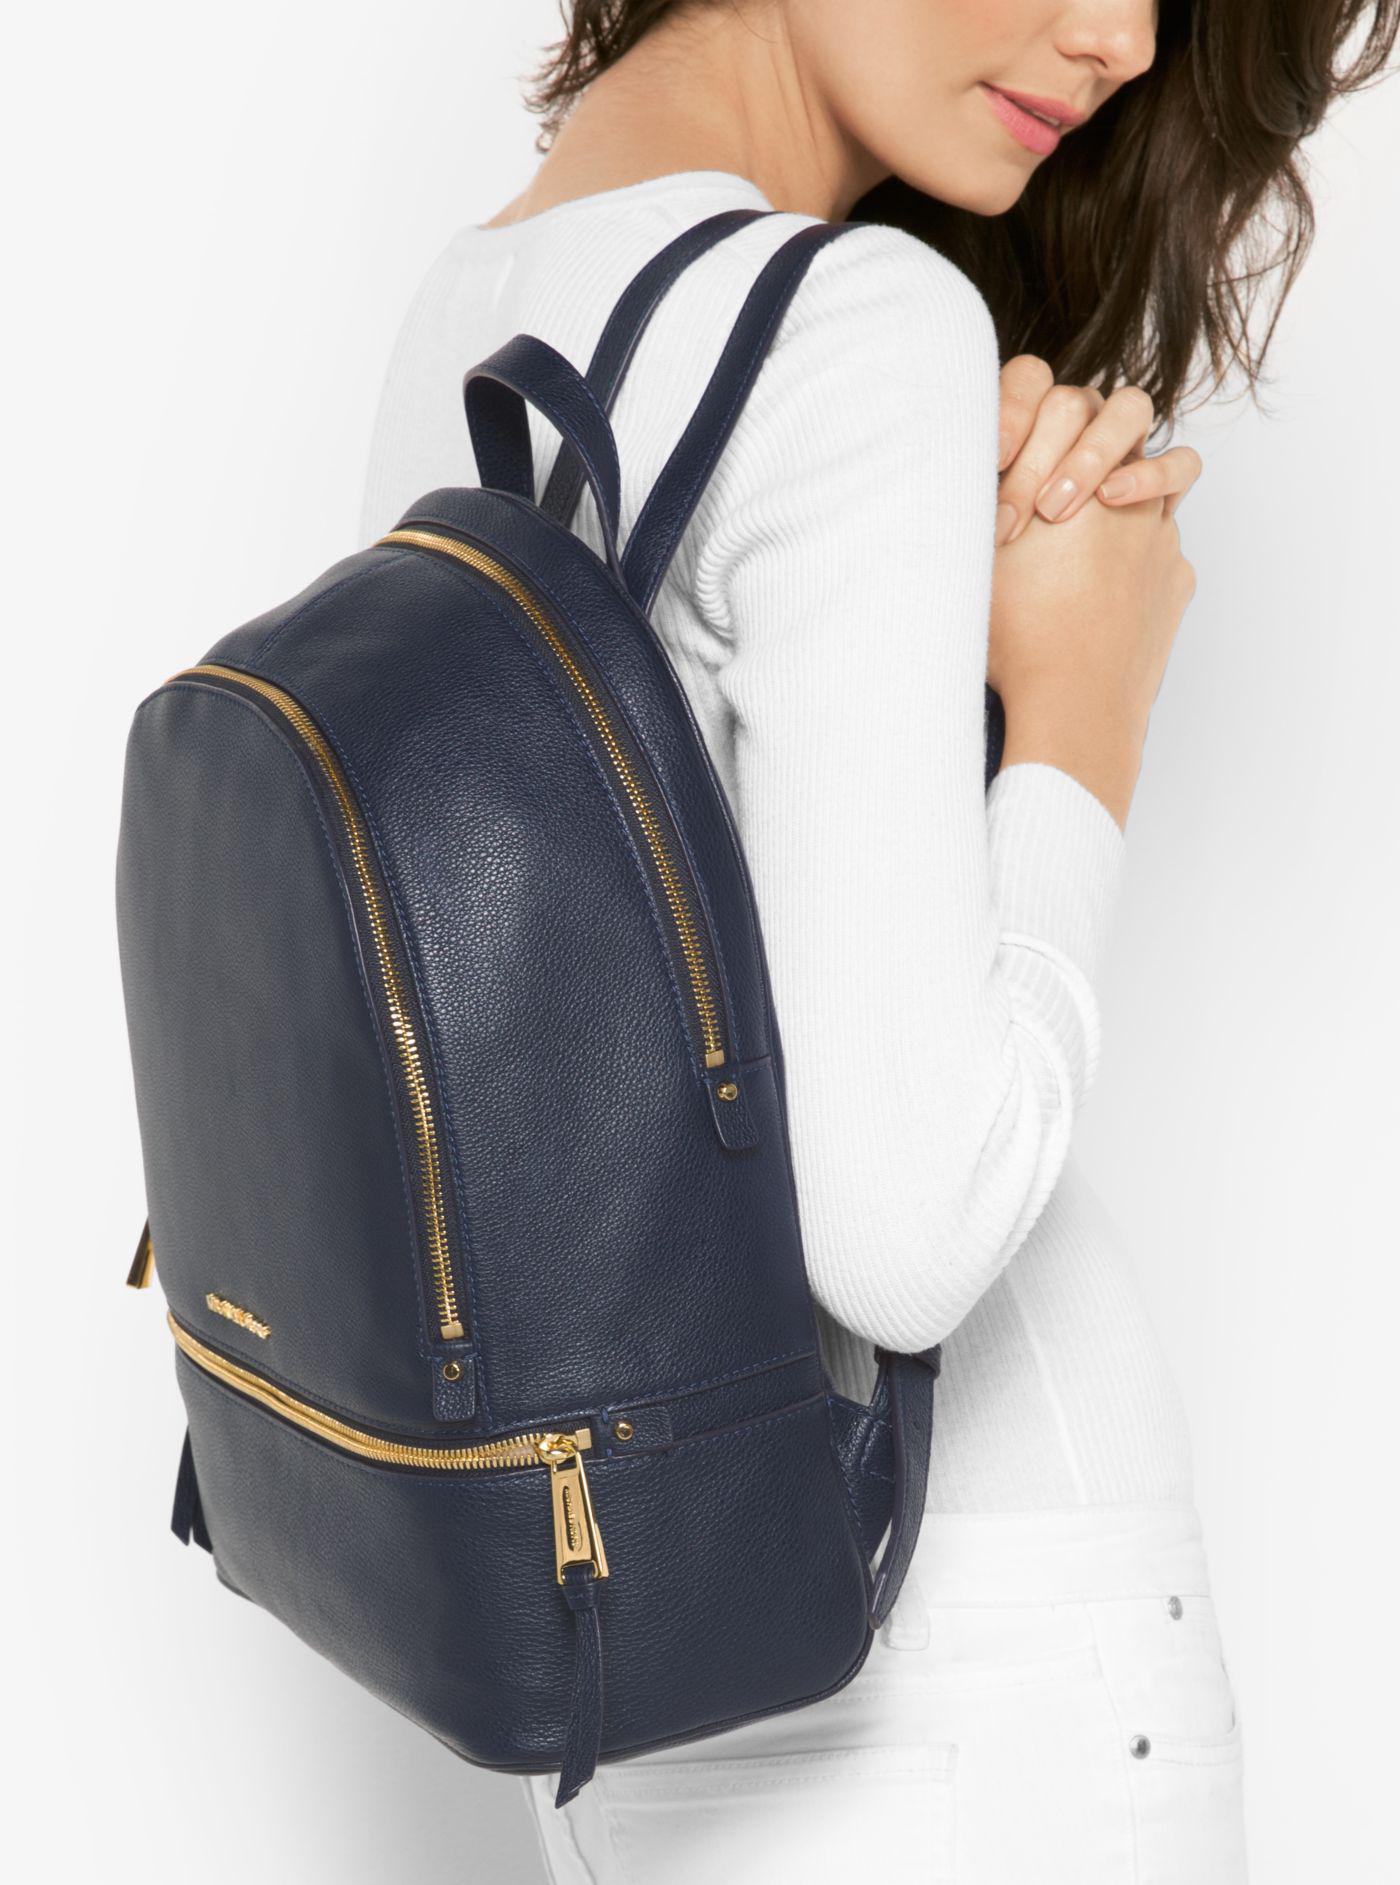 Michael Kors Leather Backpack For Women in Navy (Blue) - Lyst